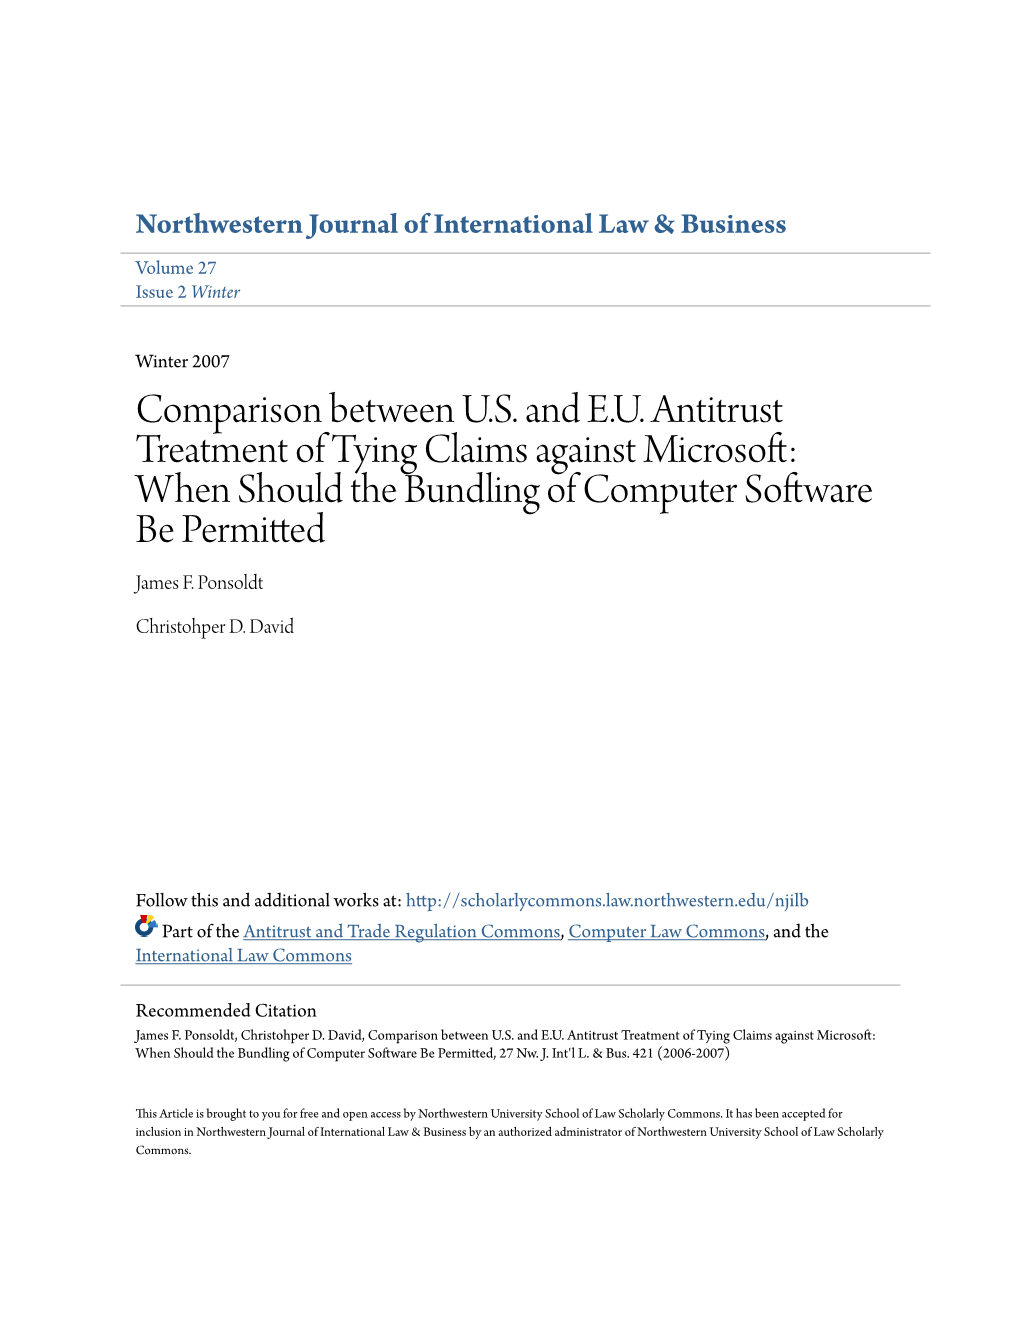 Comparison Between U.S. and E.U. Antitrust Treatment of Tying Claims Against Microsoft: When Should the Bundling of Computer Software Be Permitted James F